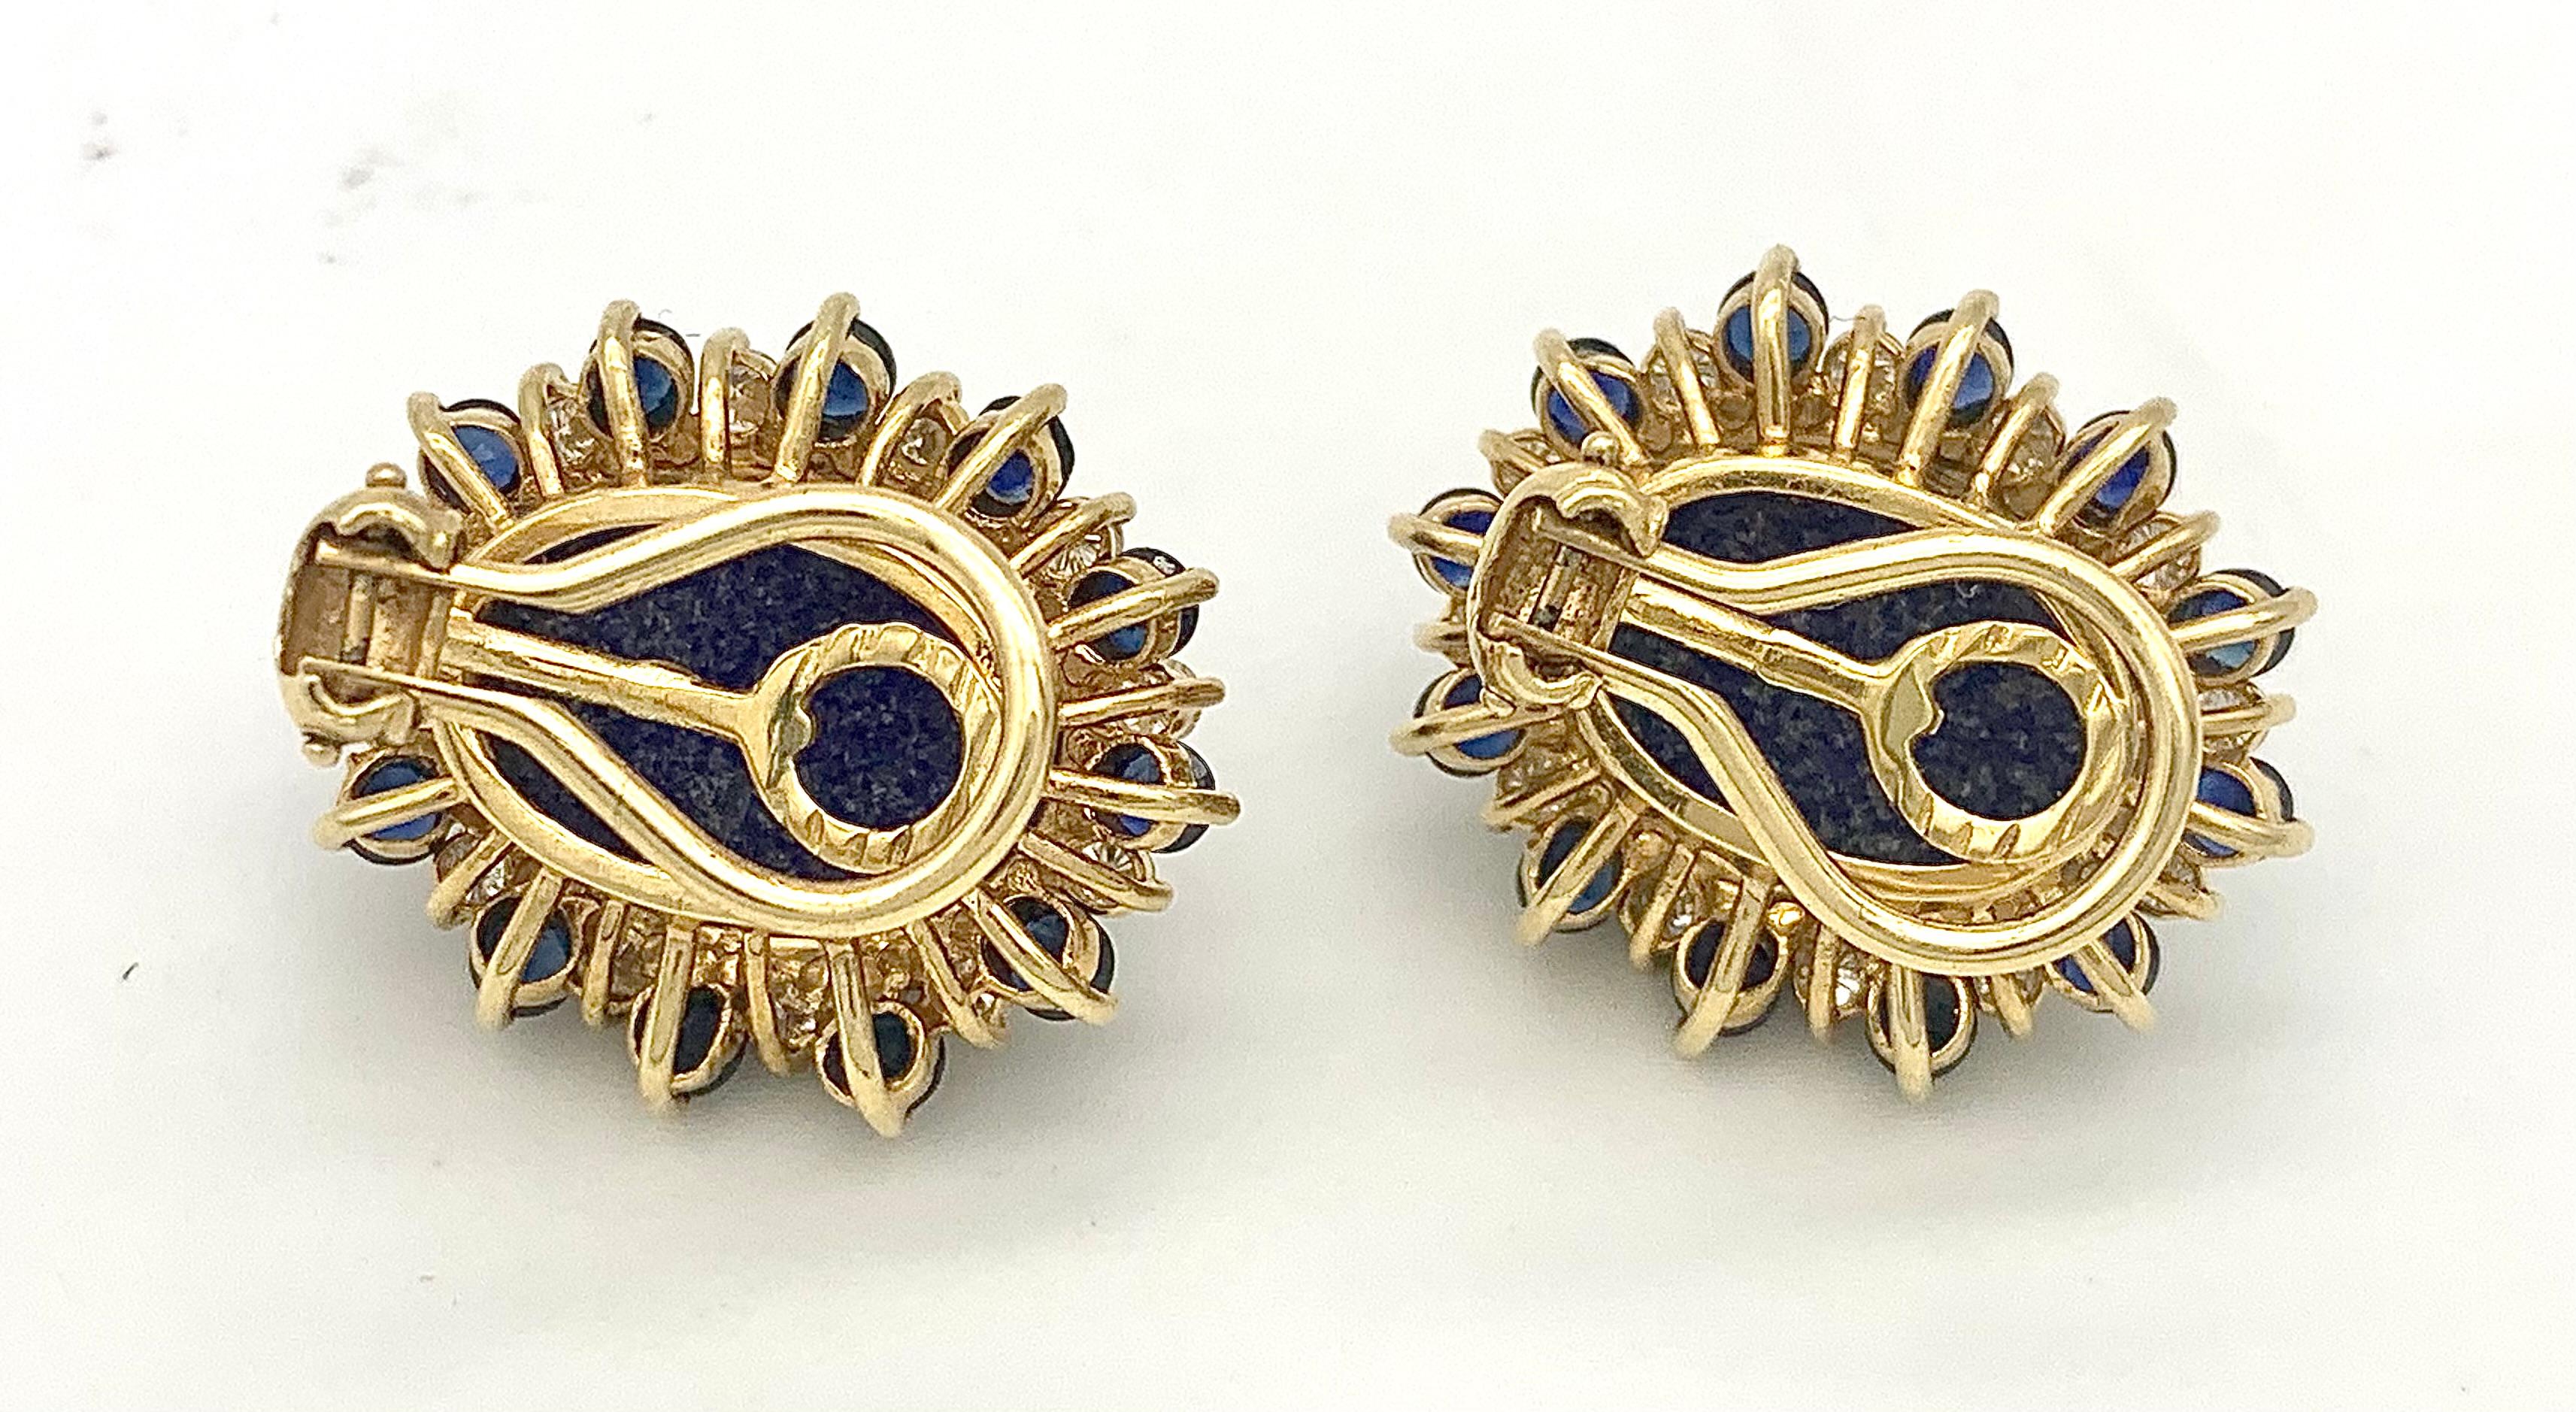 These colourful clip-on-earrings  are designed as stylized flowers with a large lapis lazuli cabochon in the centre surrounded by gem set flower petals. Each ear clip is surrounded by twelve round cut sapphires alternating with 12 round cut